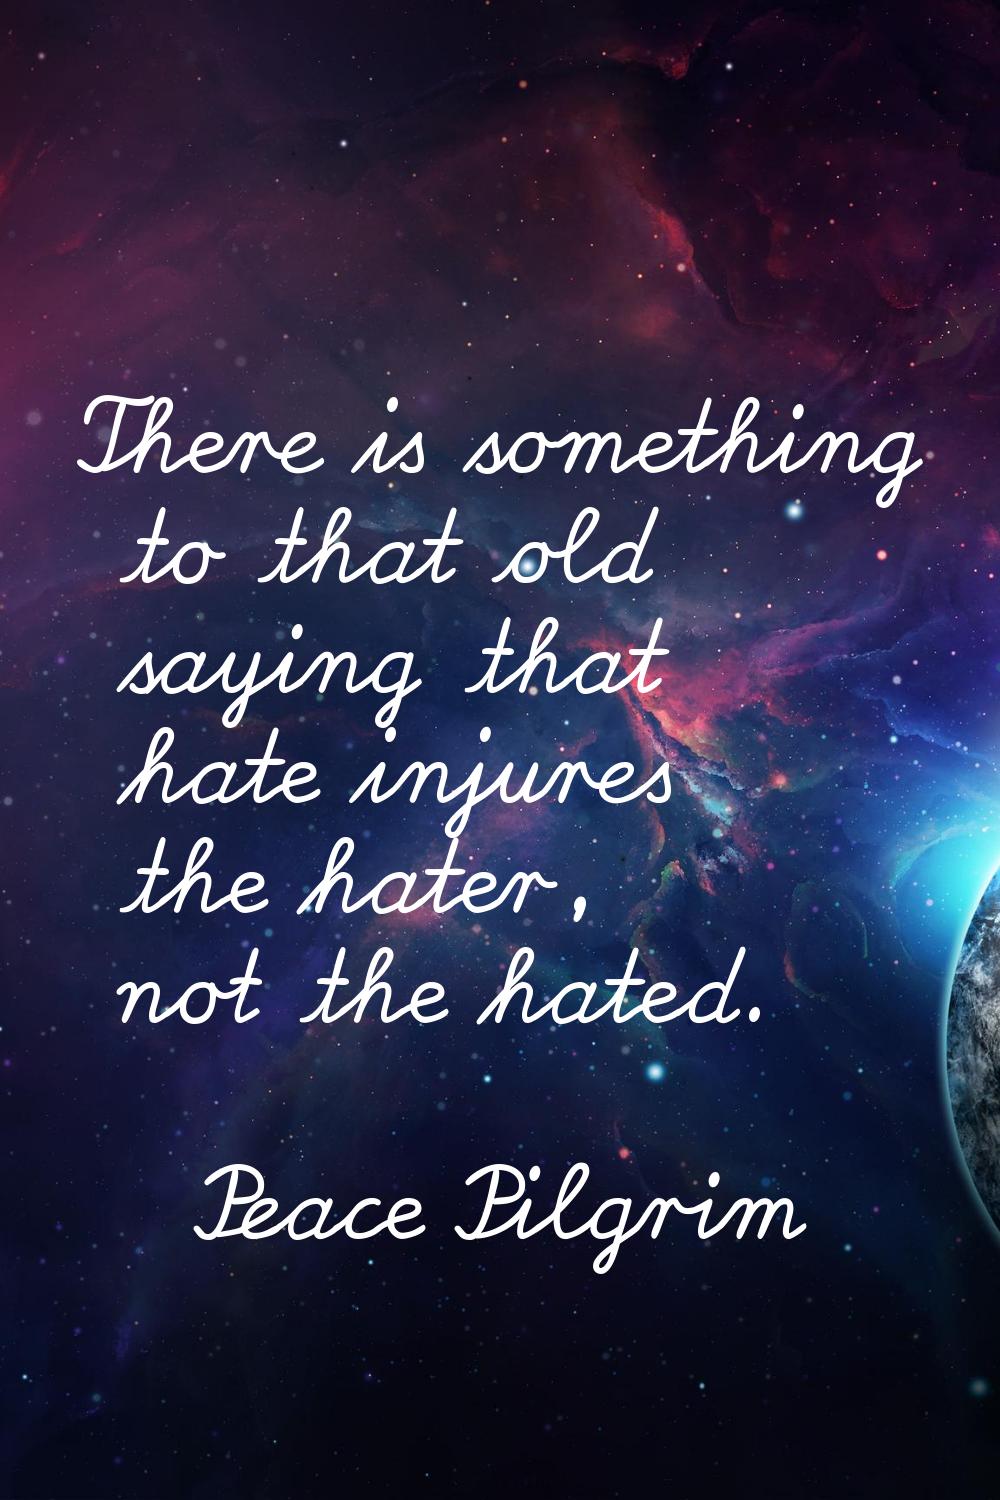 There is something to that old saying that hate injures the hater, not the hated.